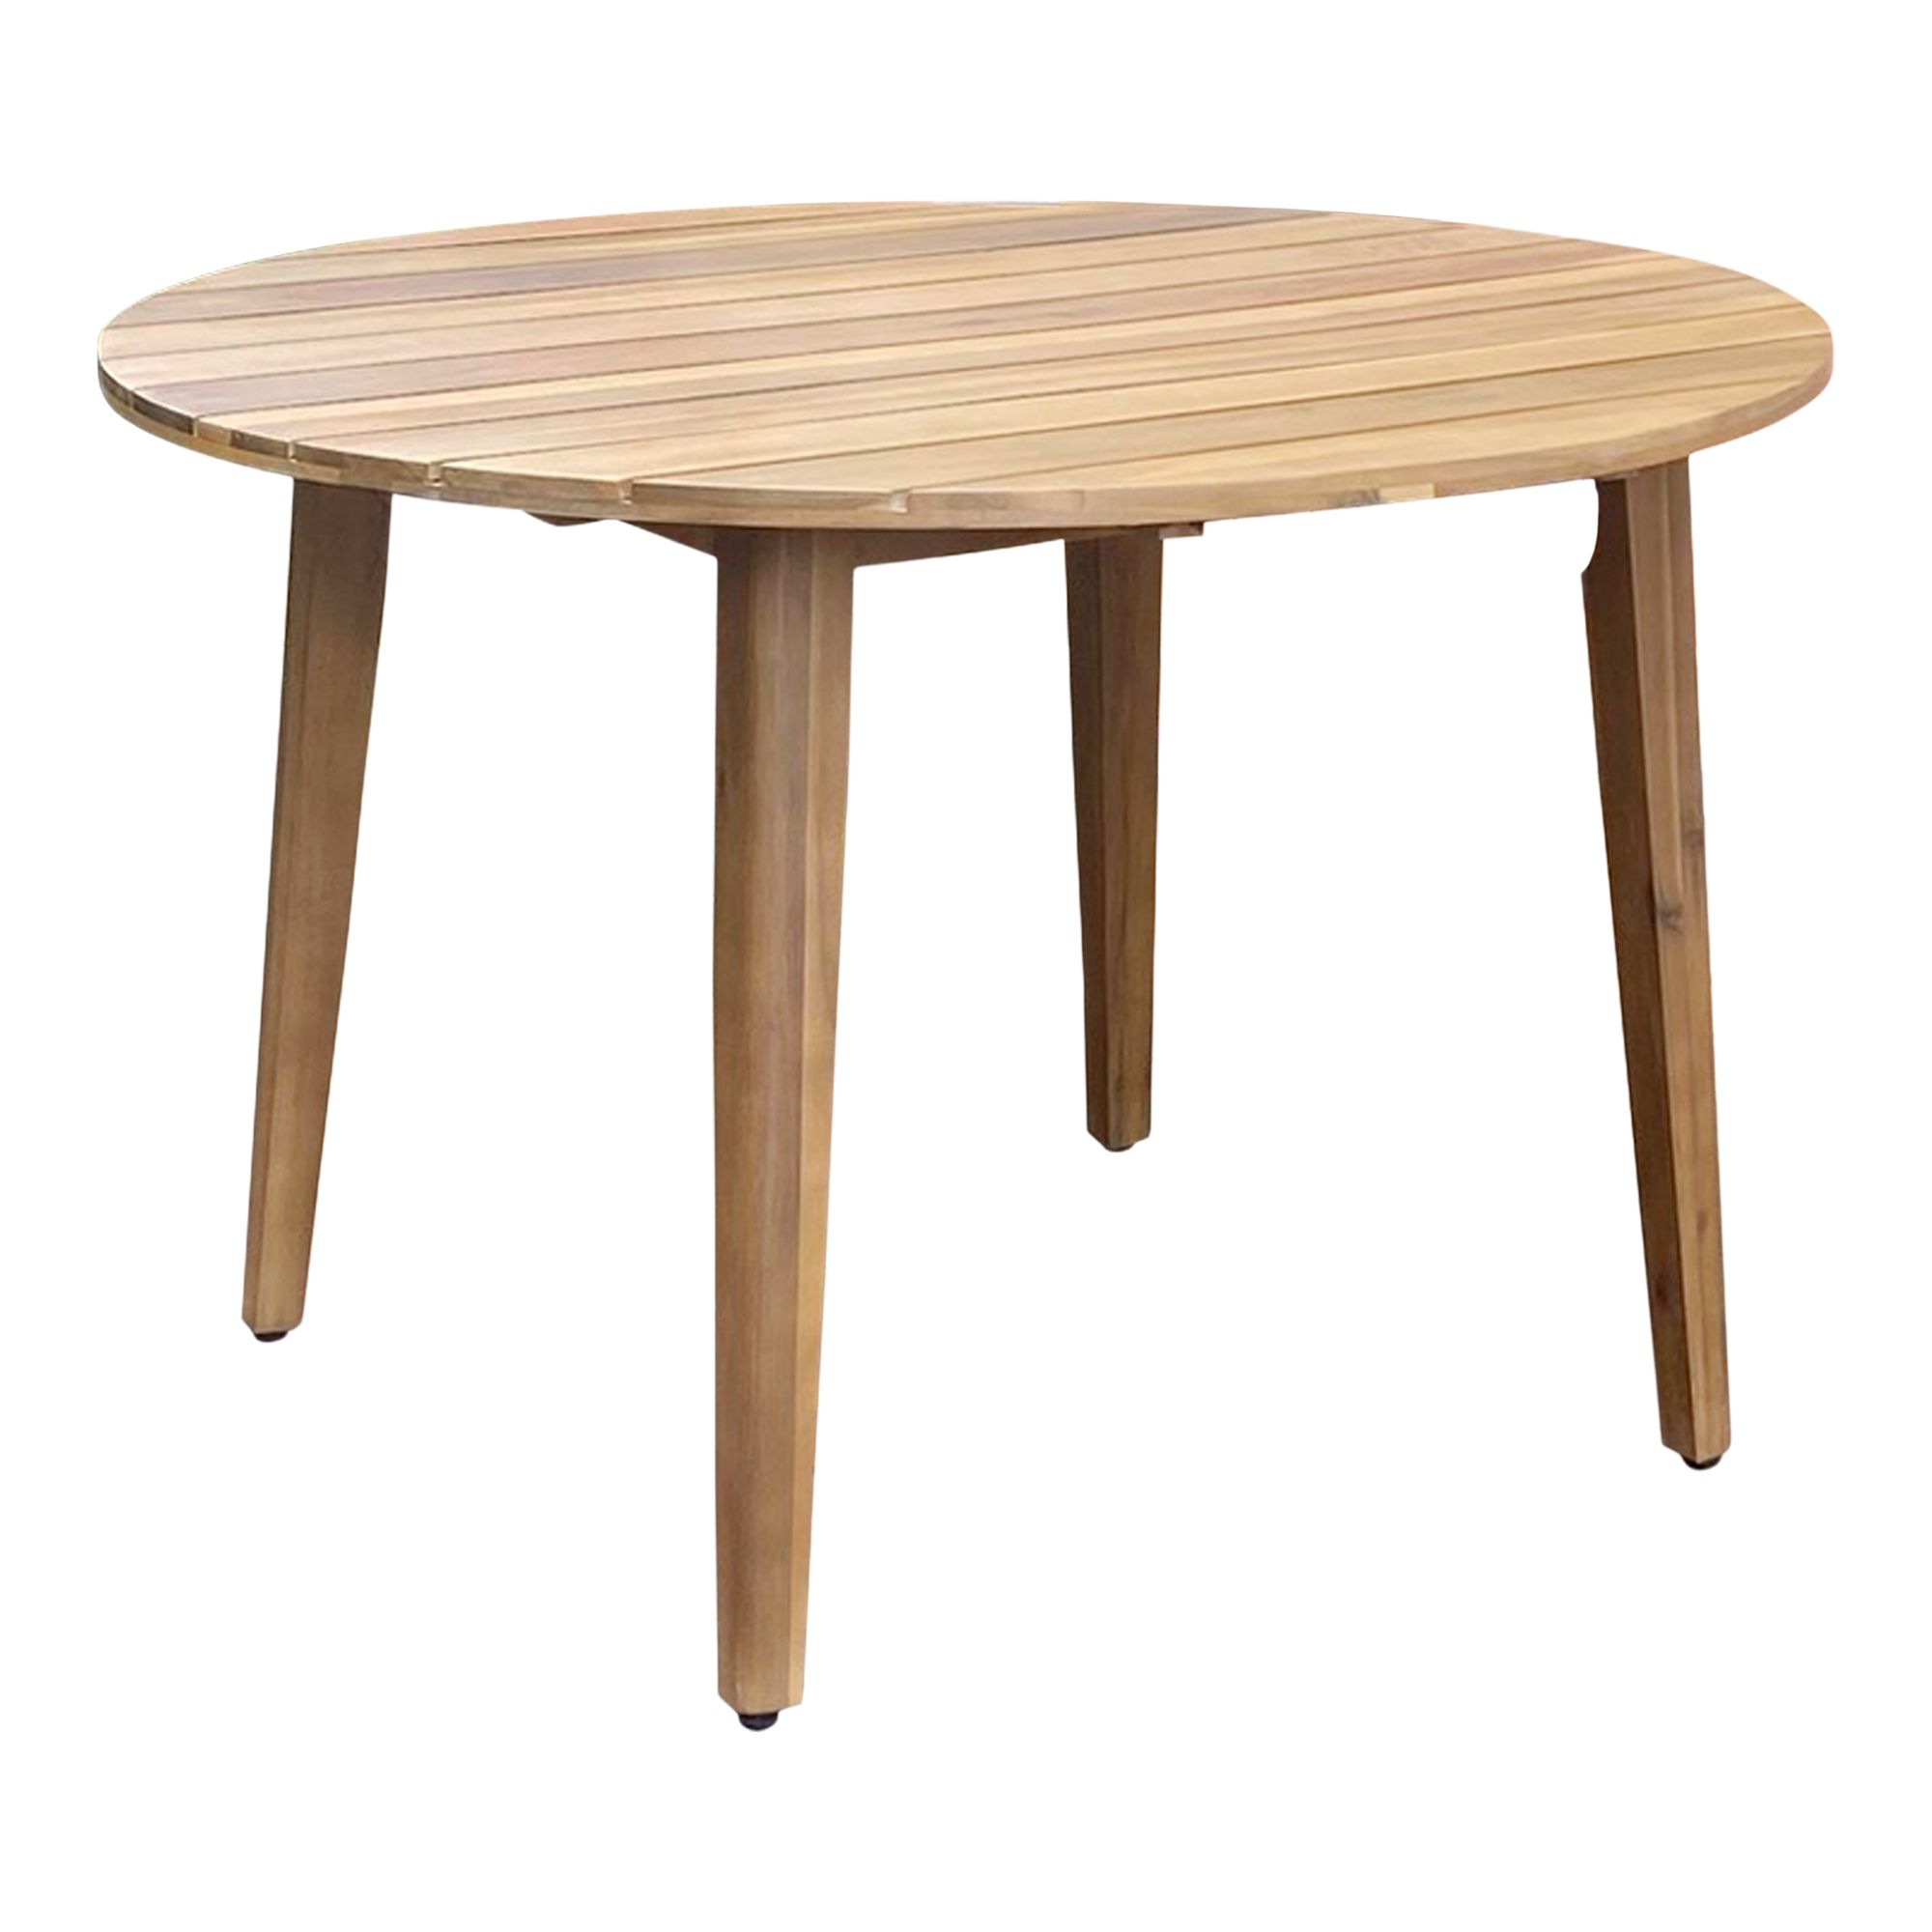 GoodHome Vitello Grey & natural Wooden 4 seater Round Dining table